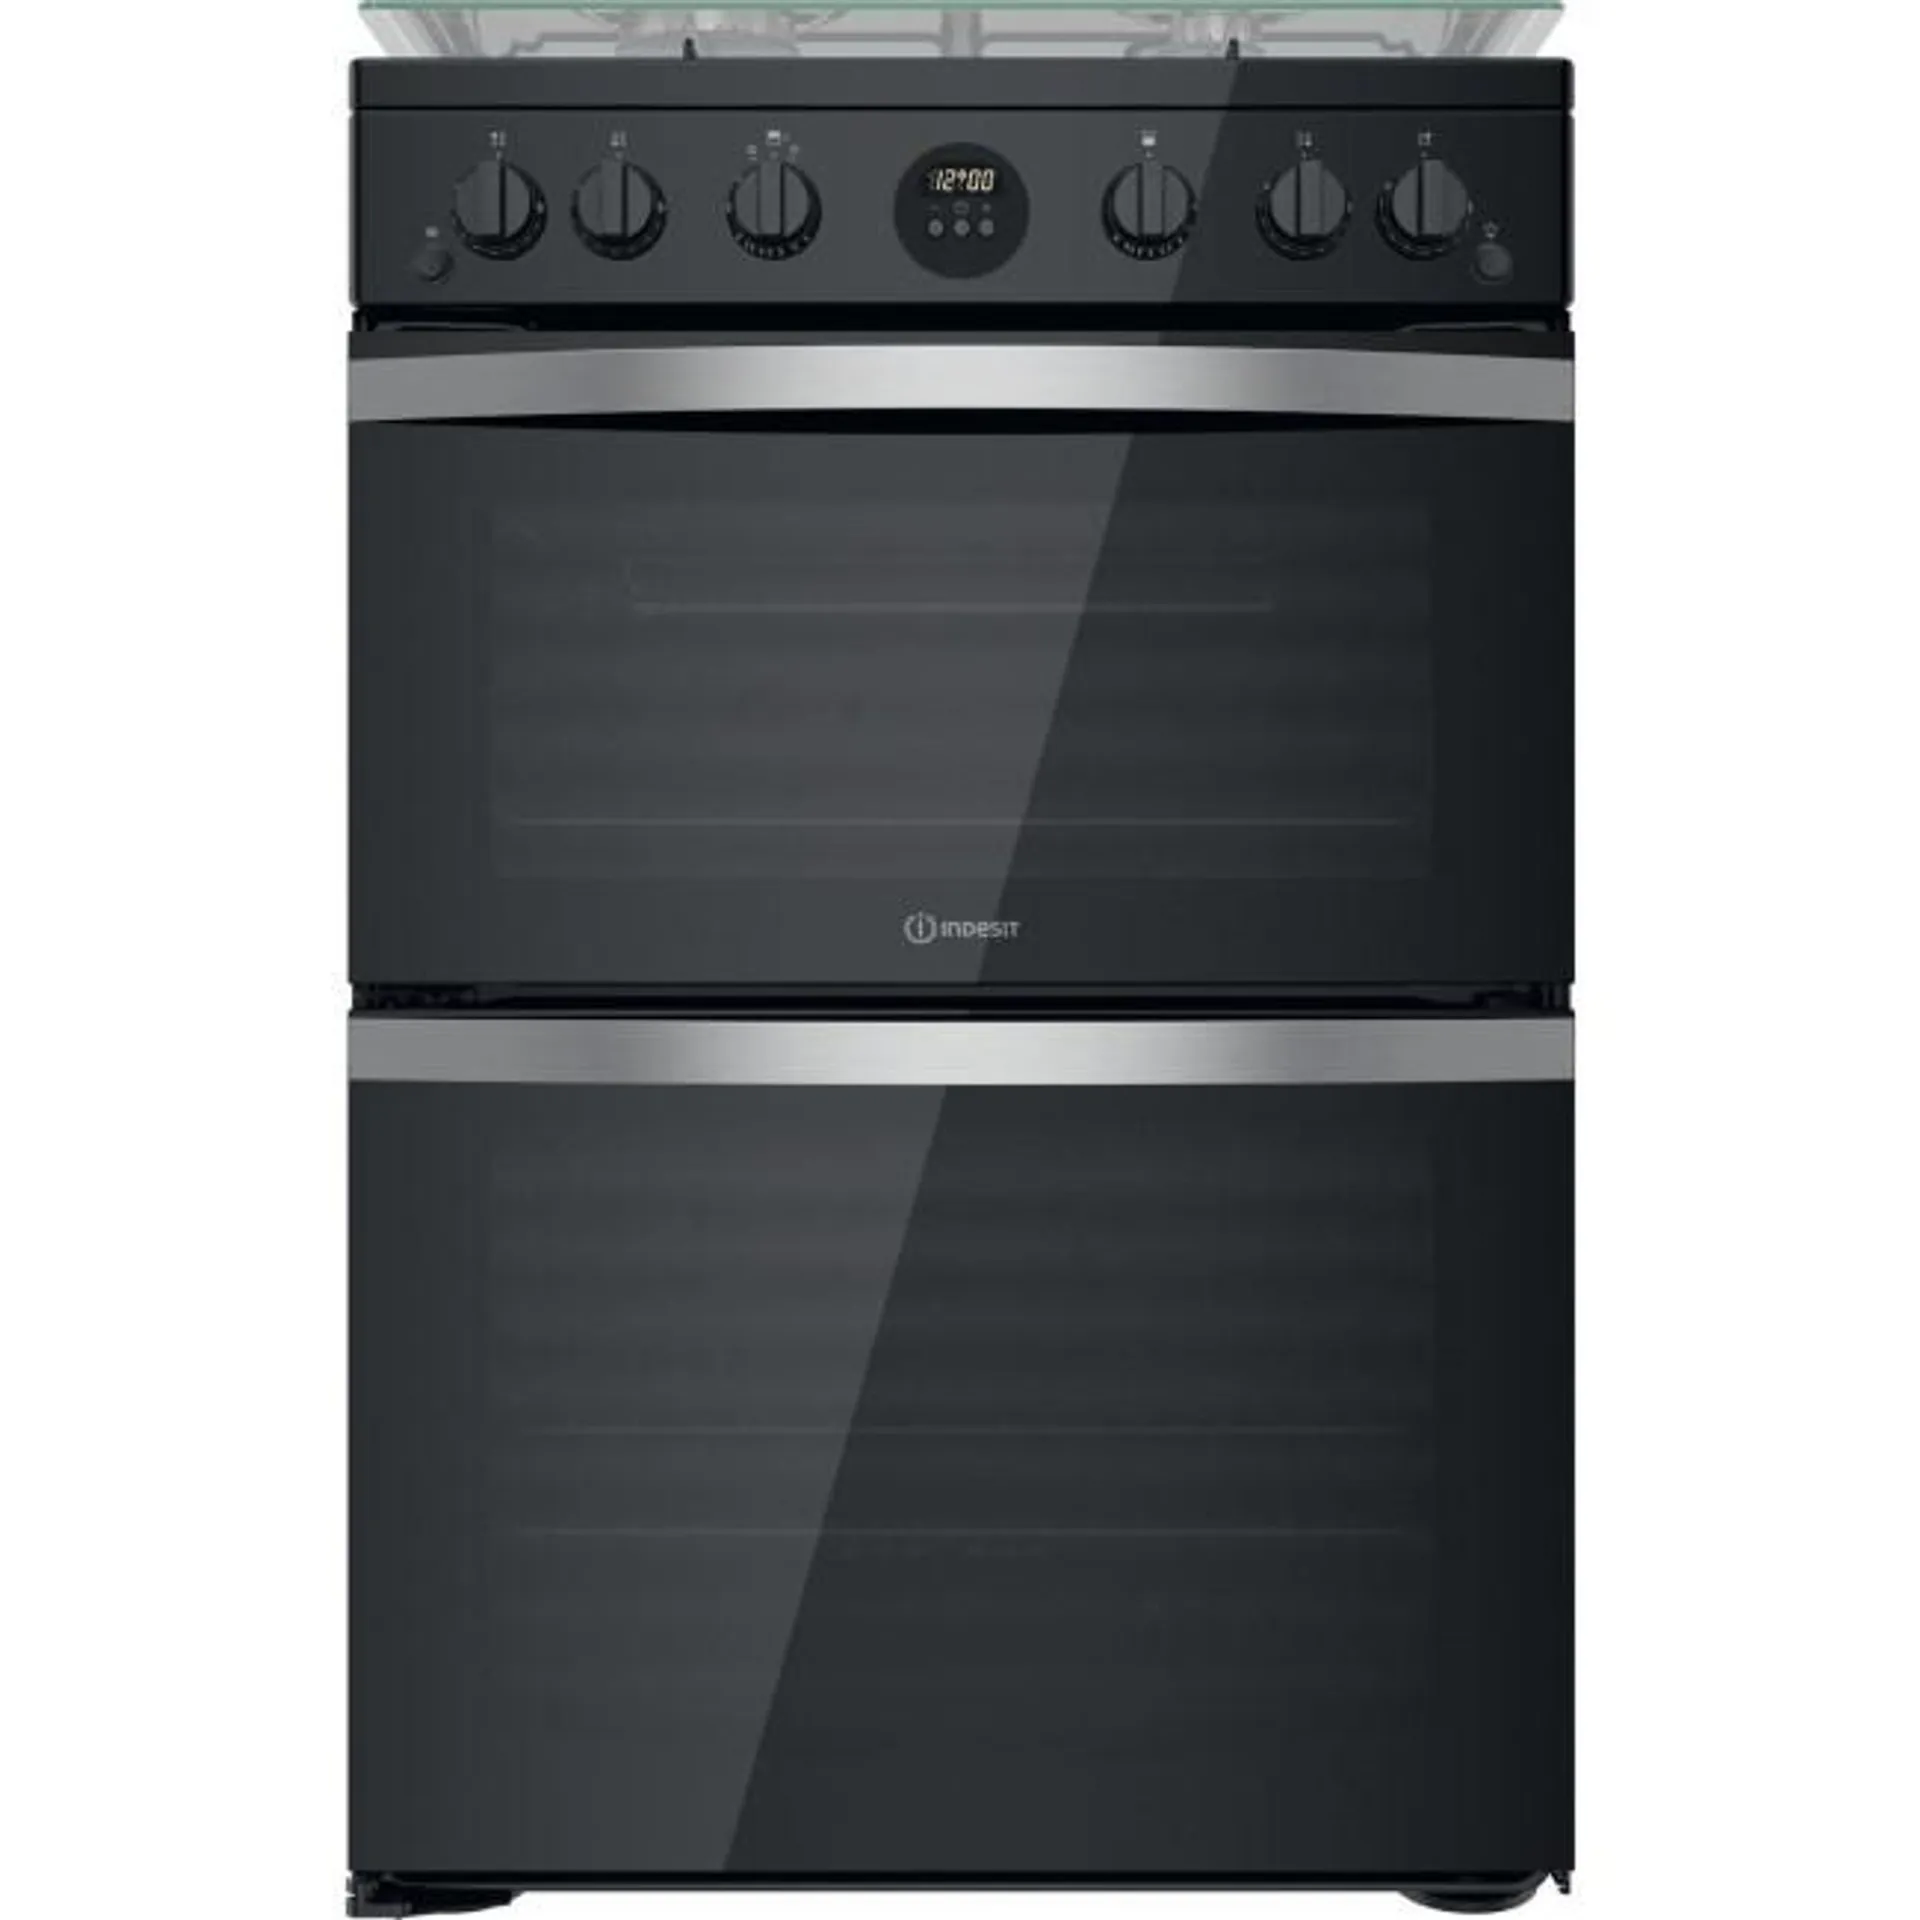 Indesit 60cm Double Oven Gas Cooker with Catalytic Liners - Black